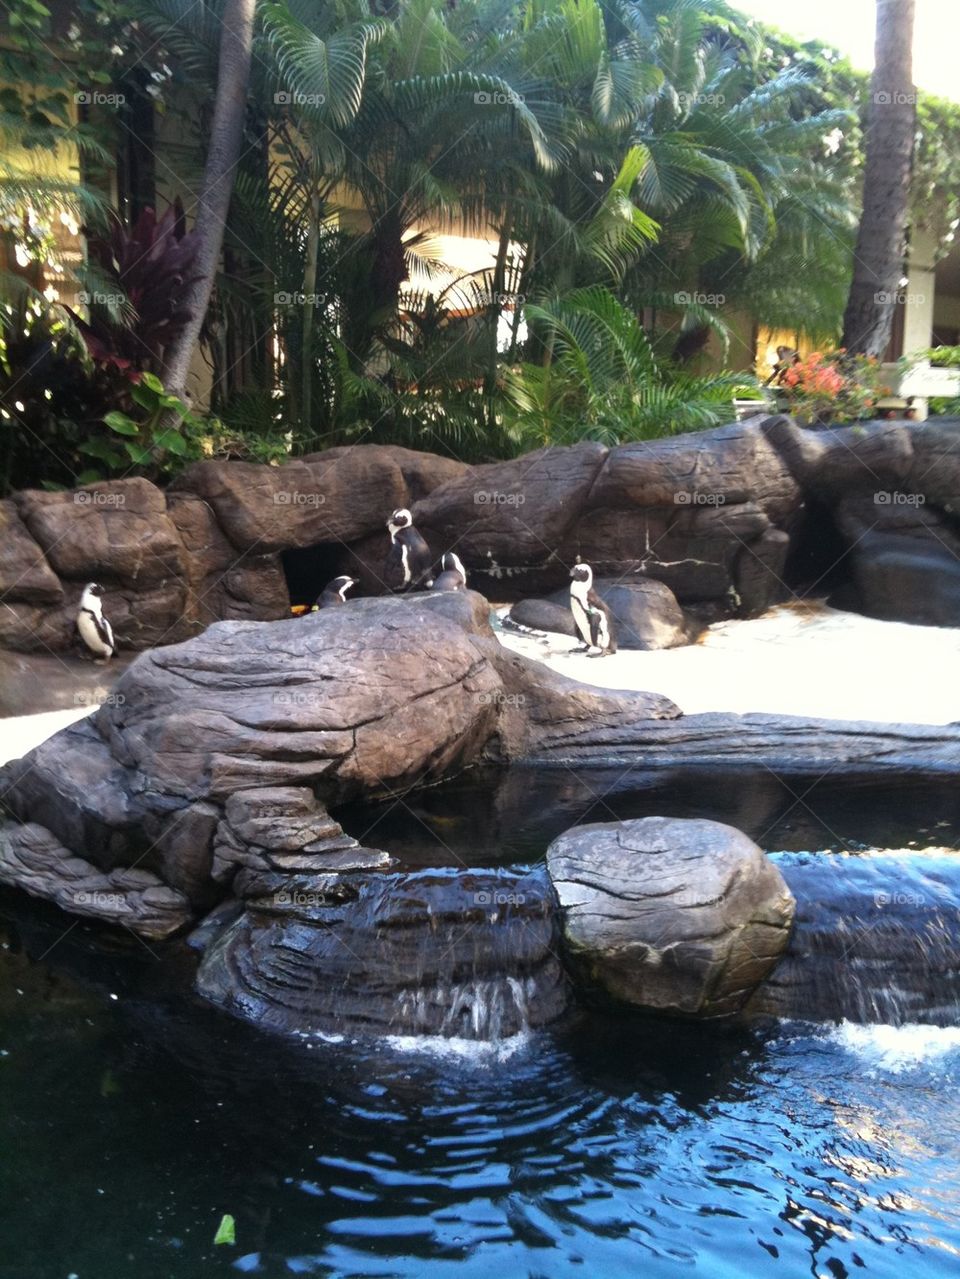 Penguins in paradise